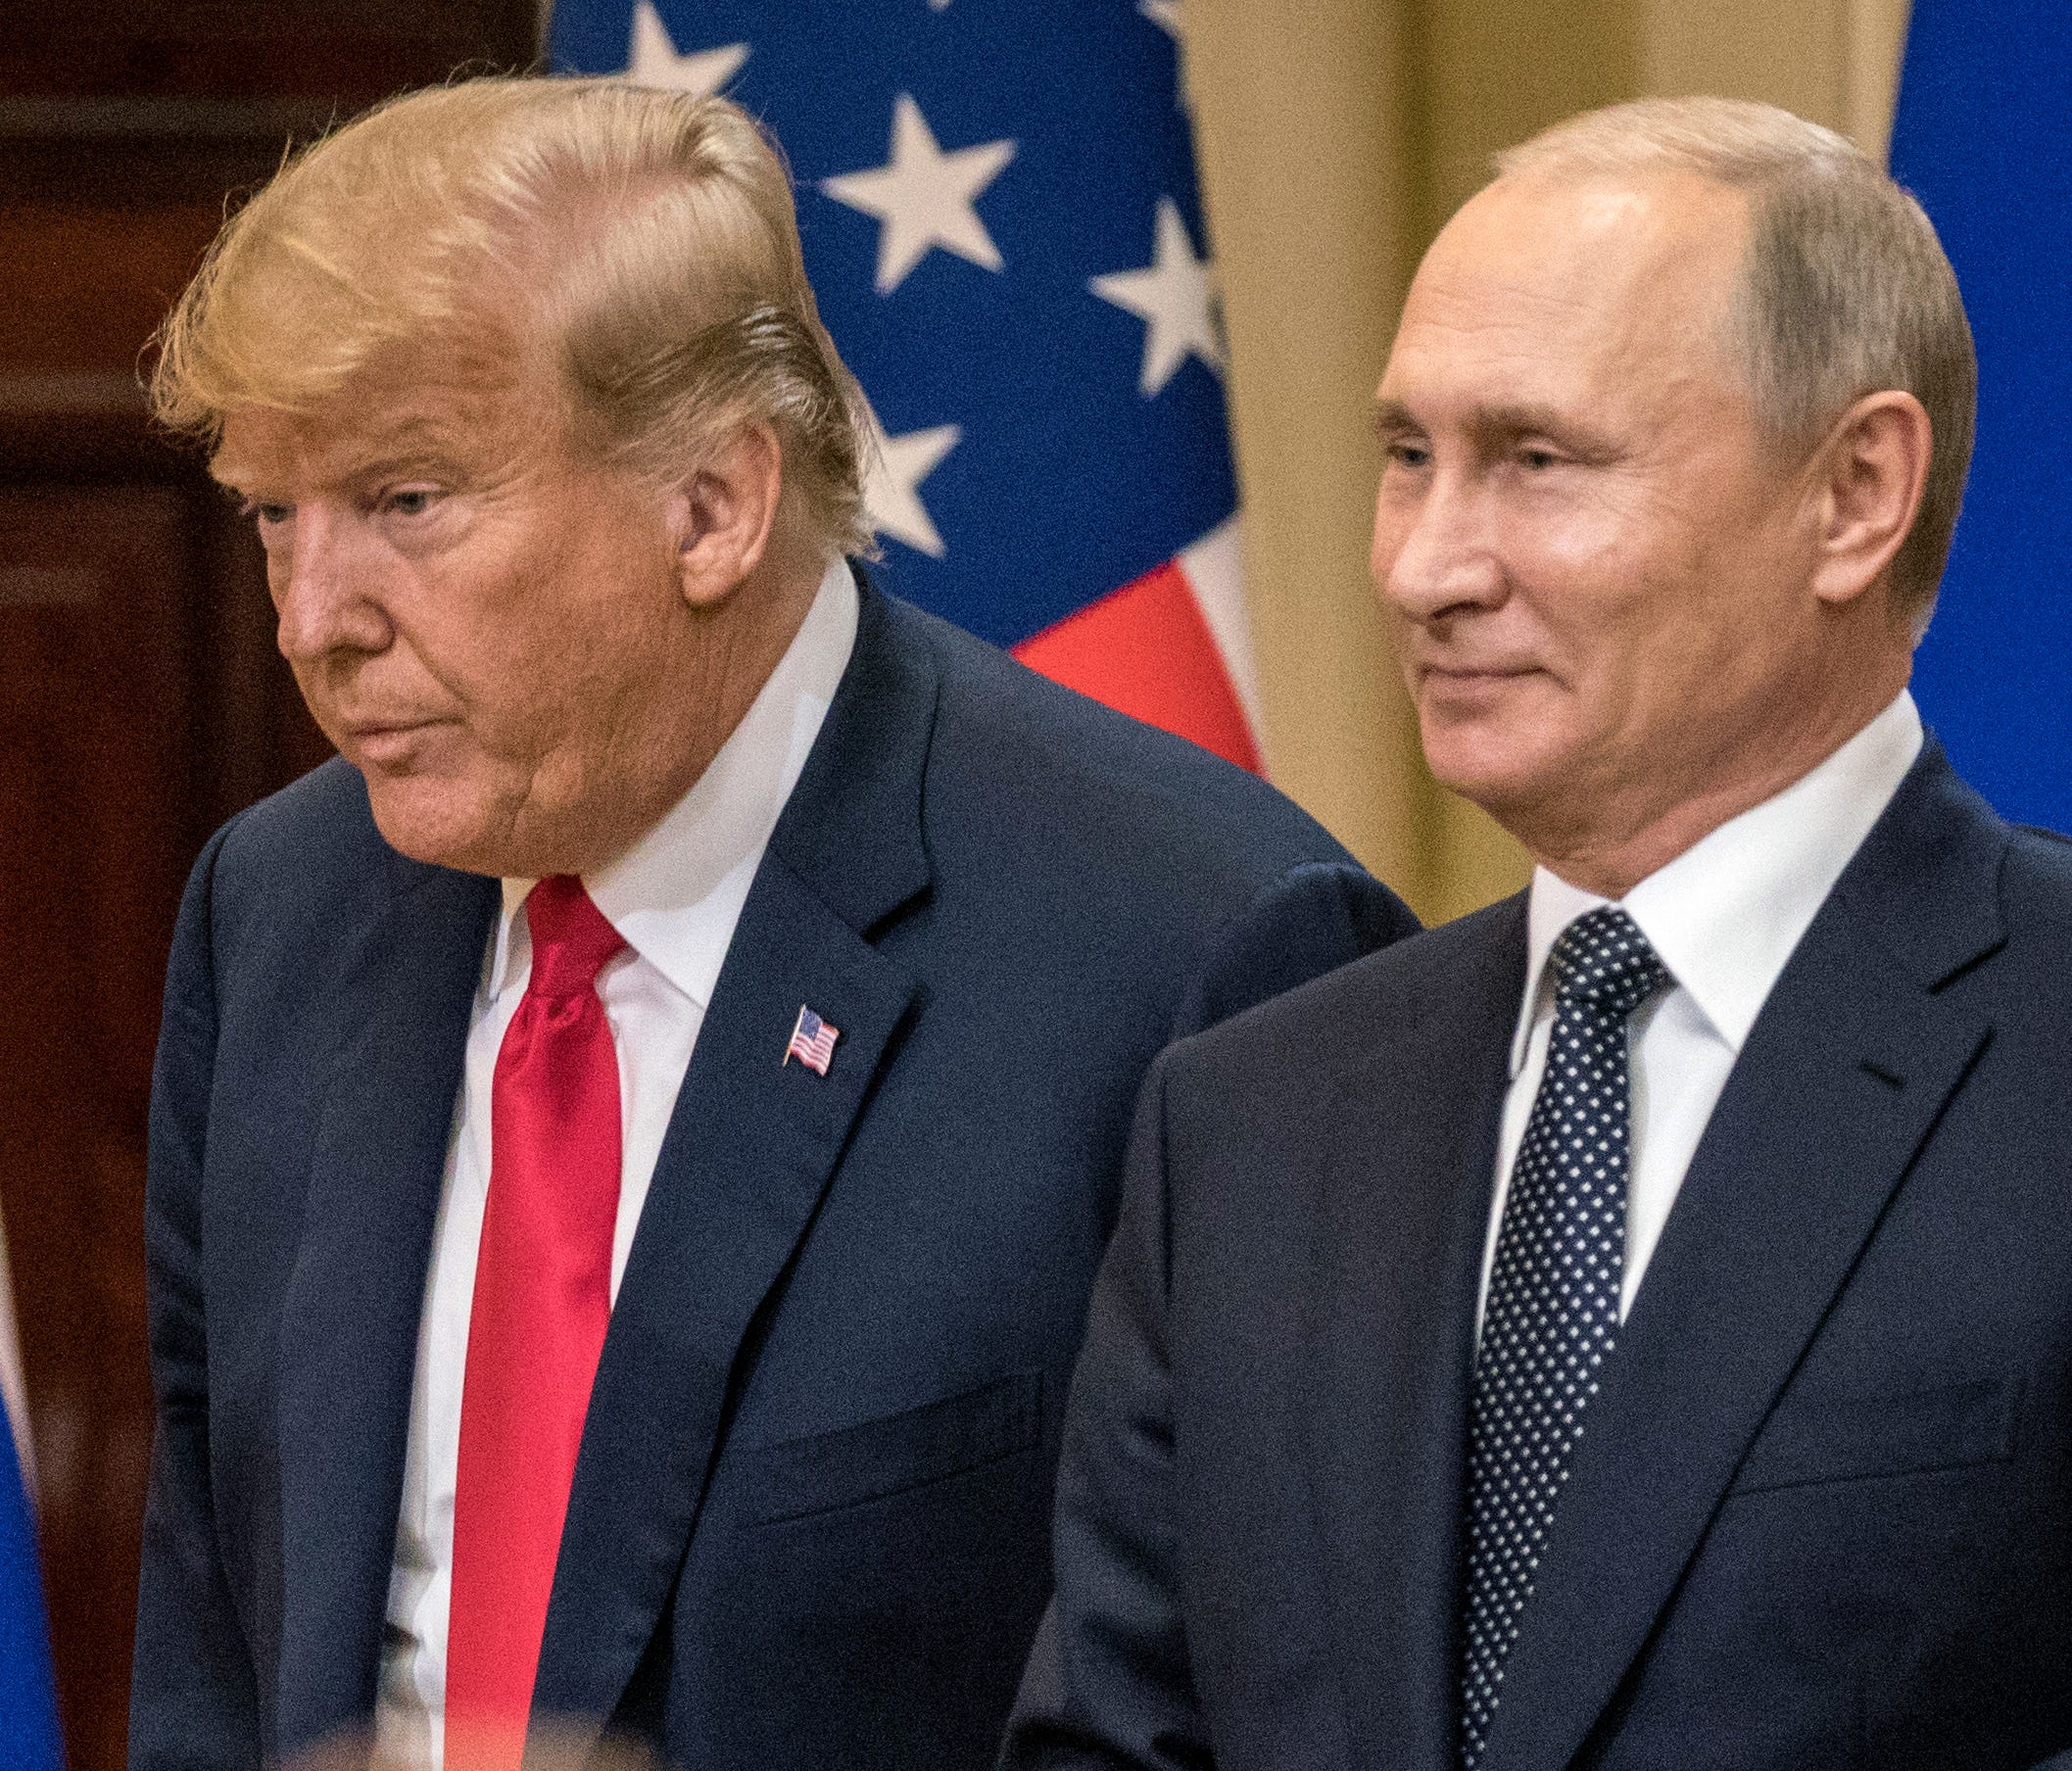 President Donald Trump and Russian President Vladimir Putin attend a joint press conference after their summit on July 16, 2018, in Helsinki, Finland.